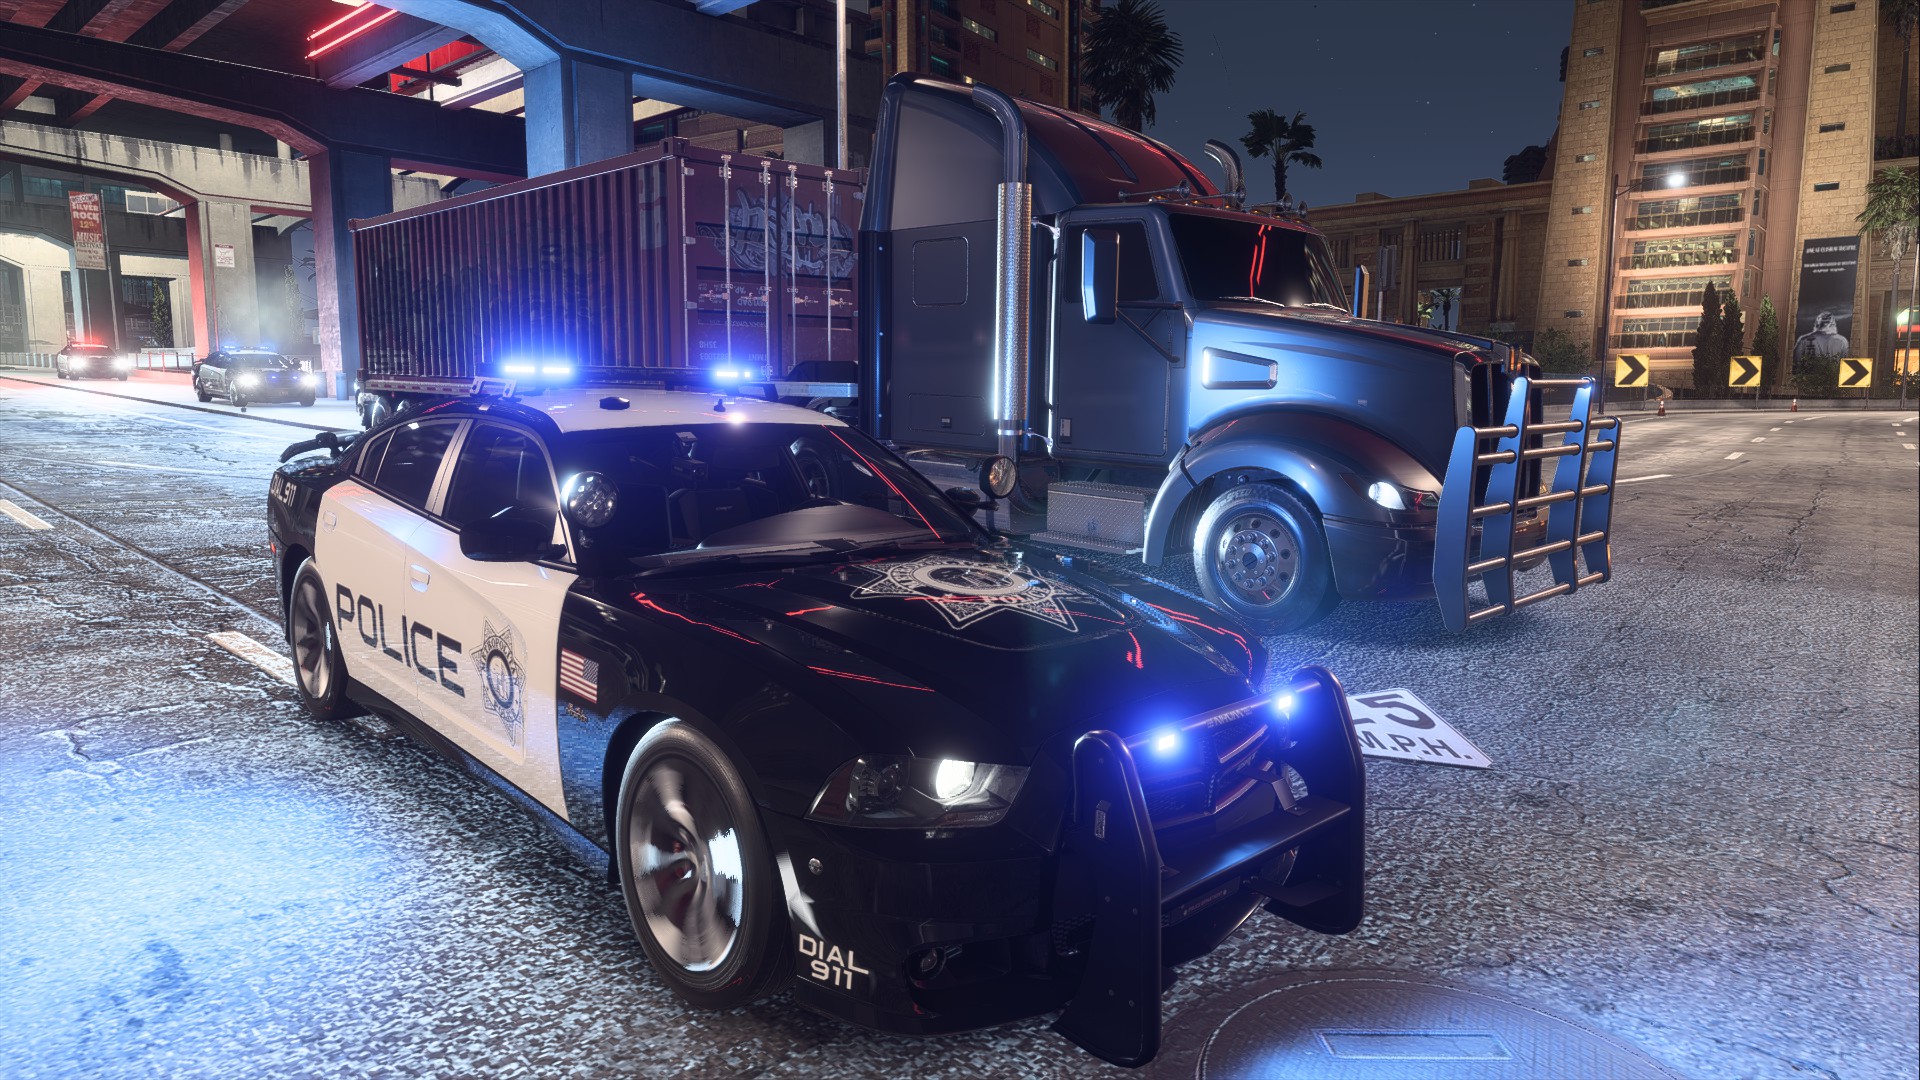 General 1920x1080 Need for Speed Payback police cars truck video games vehicle PC gaming car